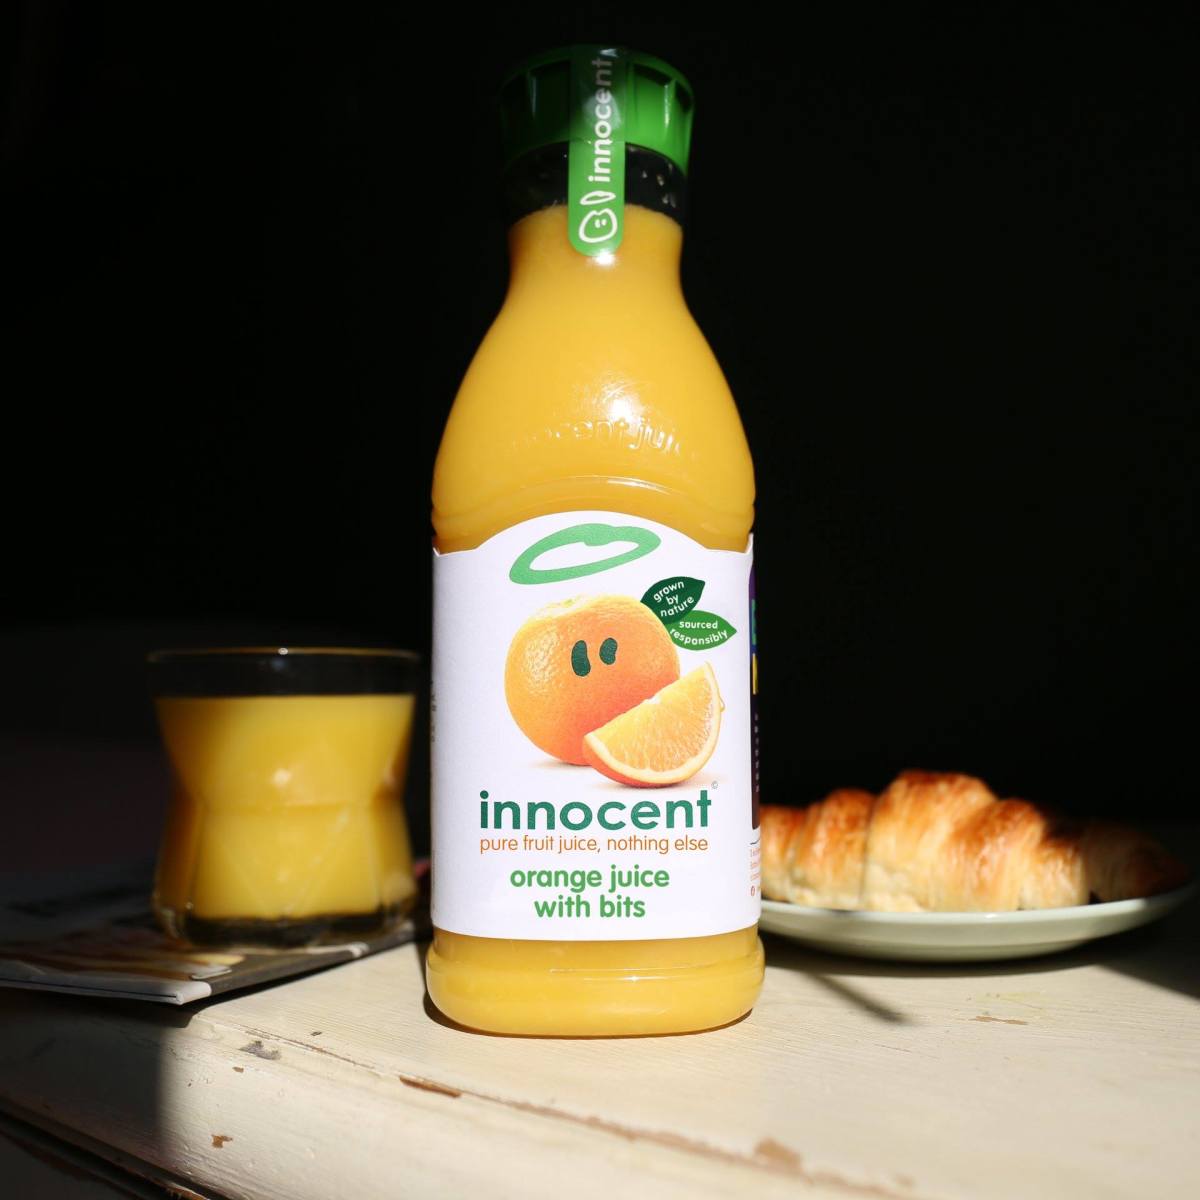 Why Innocent Drinks Need To Incorporate CSR and Ethical Practices in Its Operations